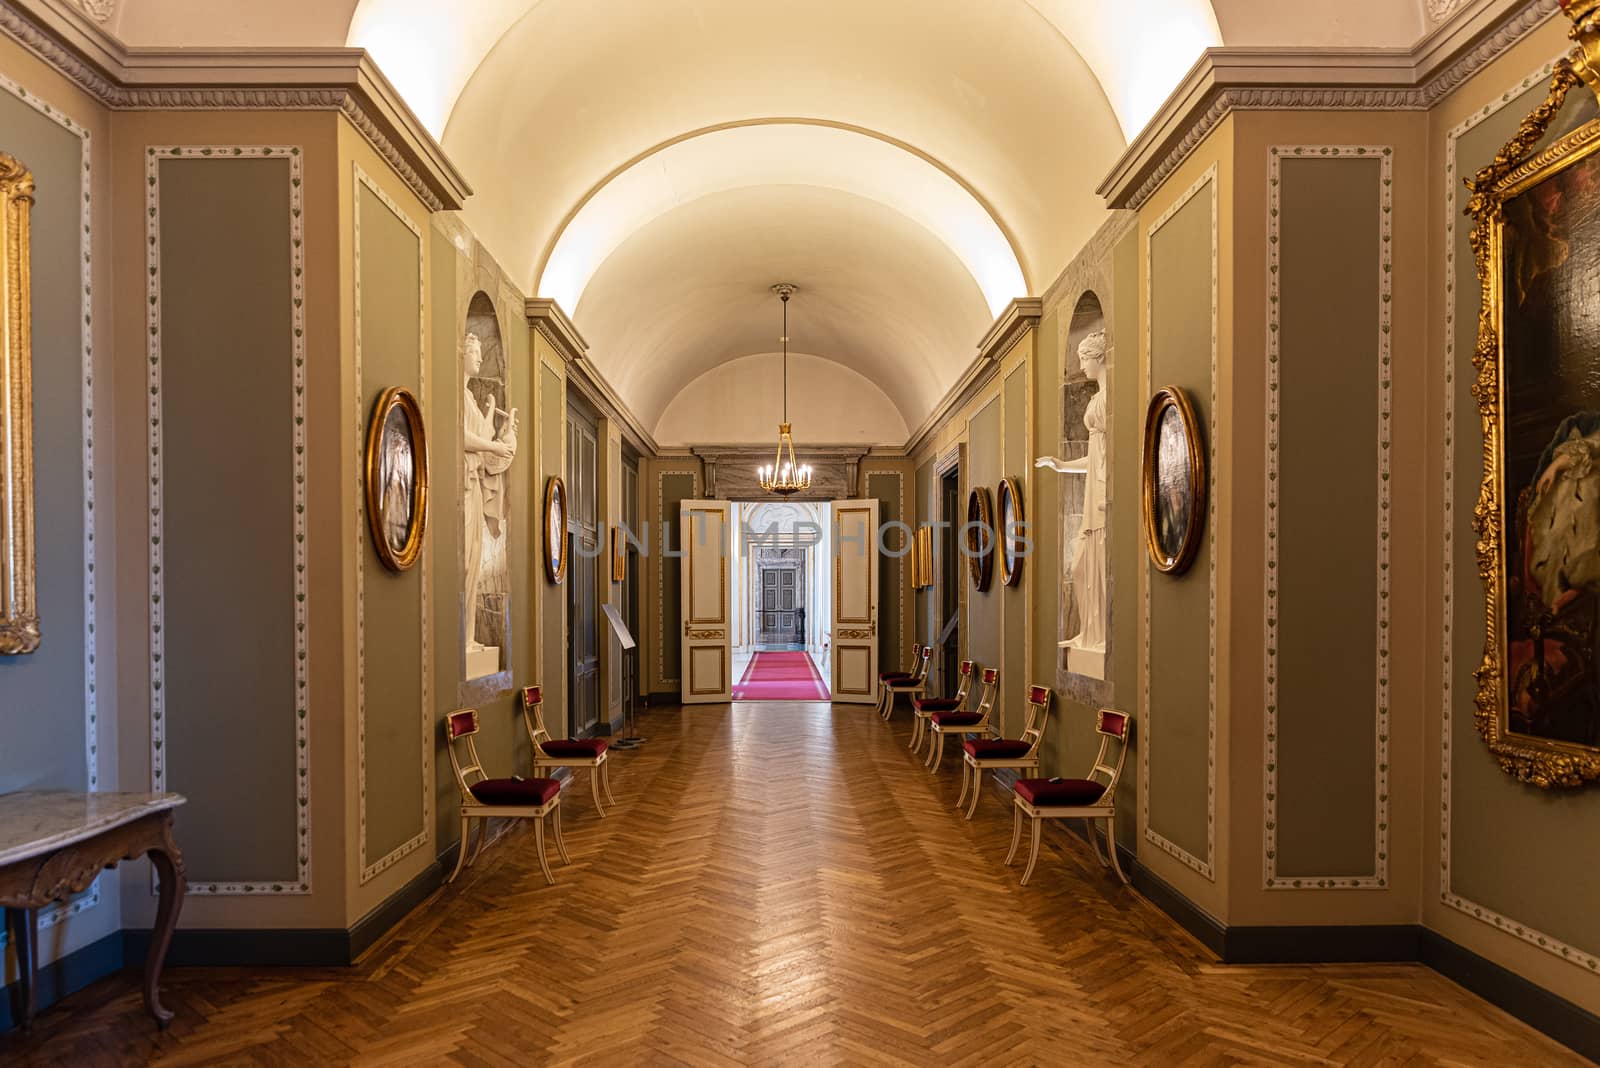 Interiors of royal halls in Christiansborg Palace in Copenhagen Denmark, corridor with antique furniture and paintings